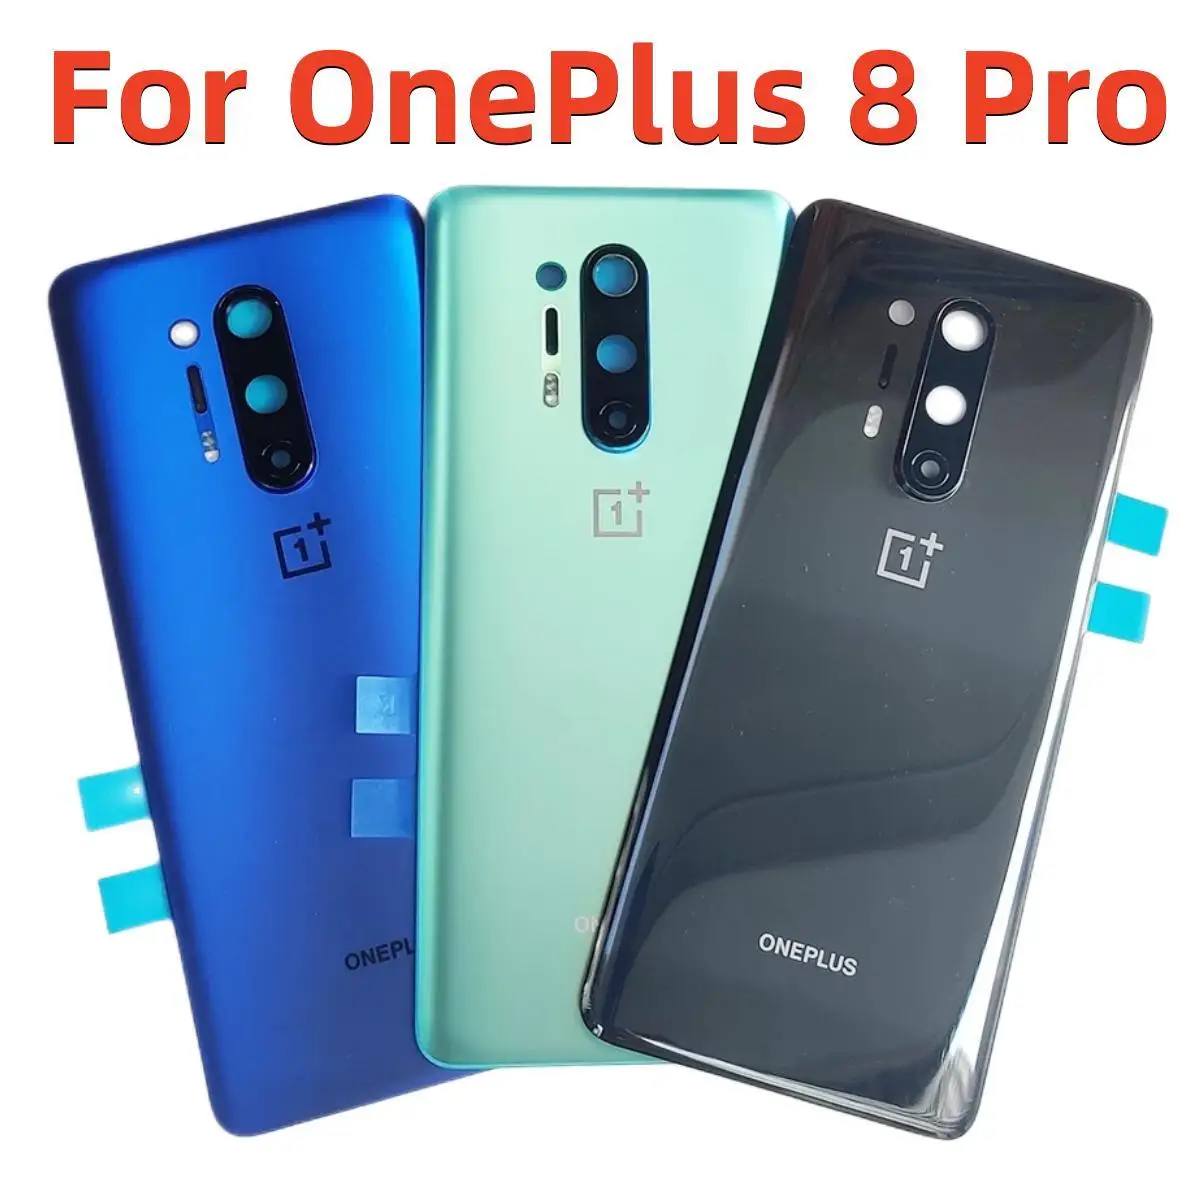 

8Pro Rear Housing Original Oneplus 8 Pro One Plus Glass Back Cover Repair Replace Battery Door Case With Camera Glass Lens +Logo